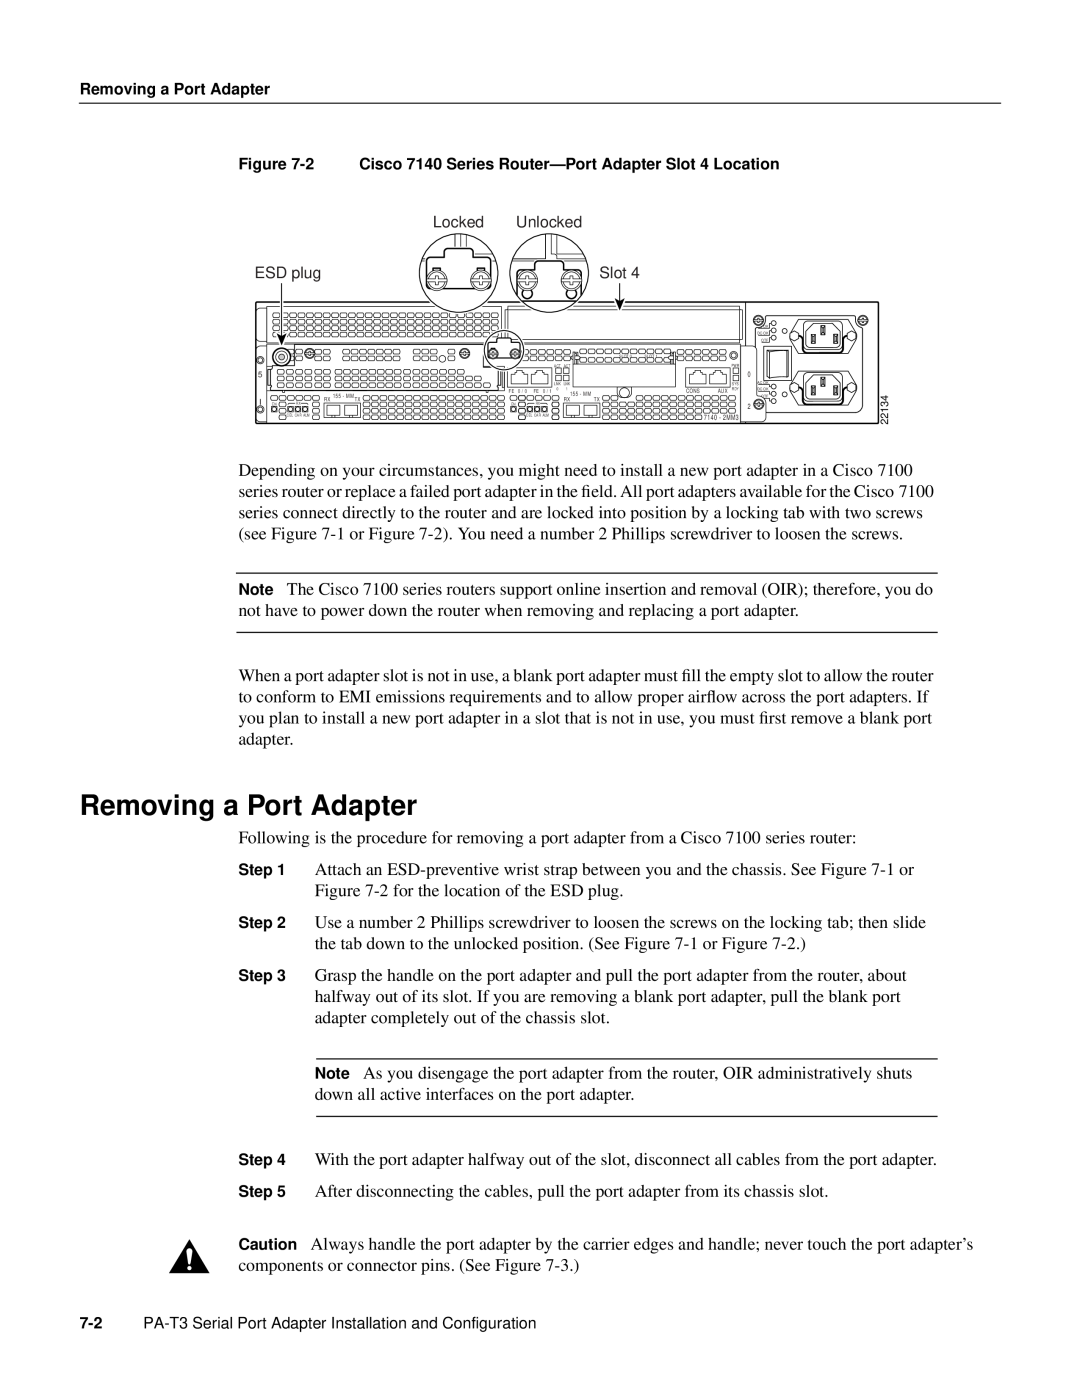 Cisco Systems PA-T3 manual Removing a Port Adapter 